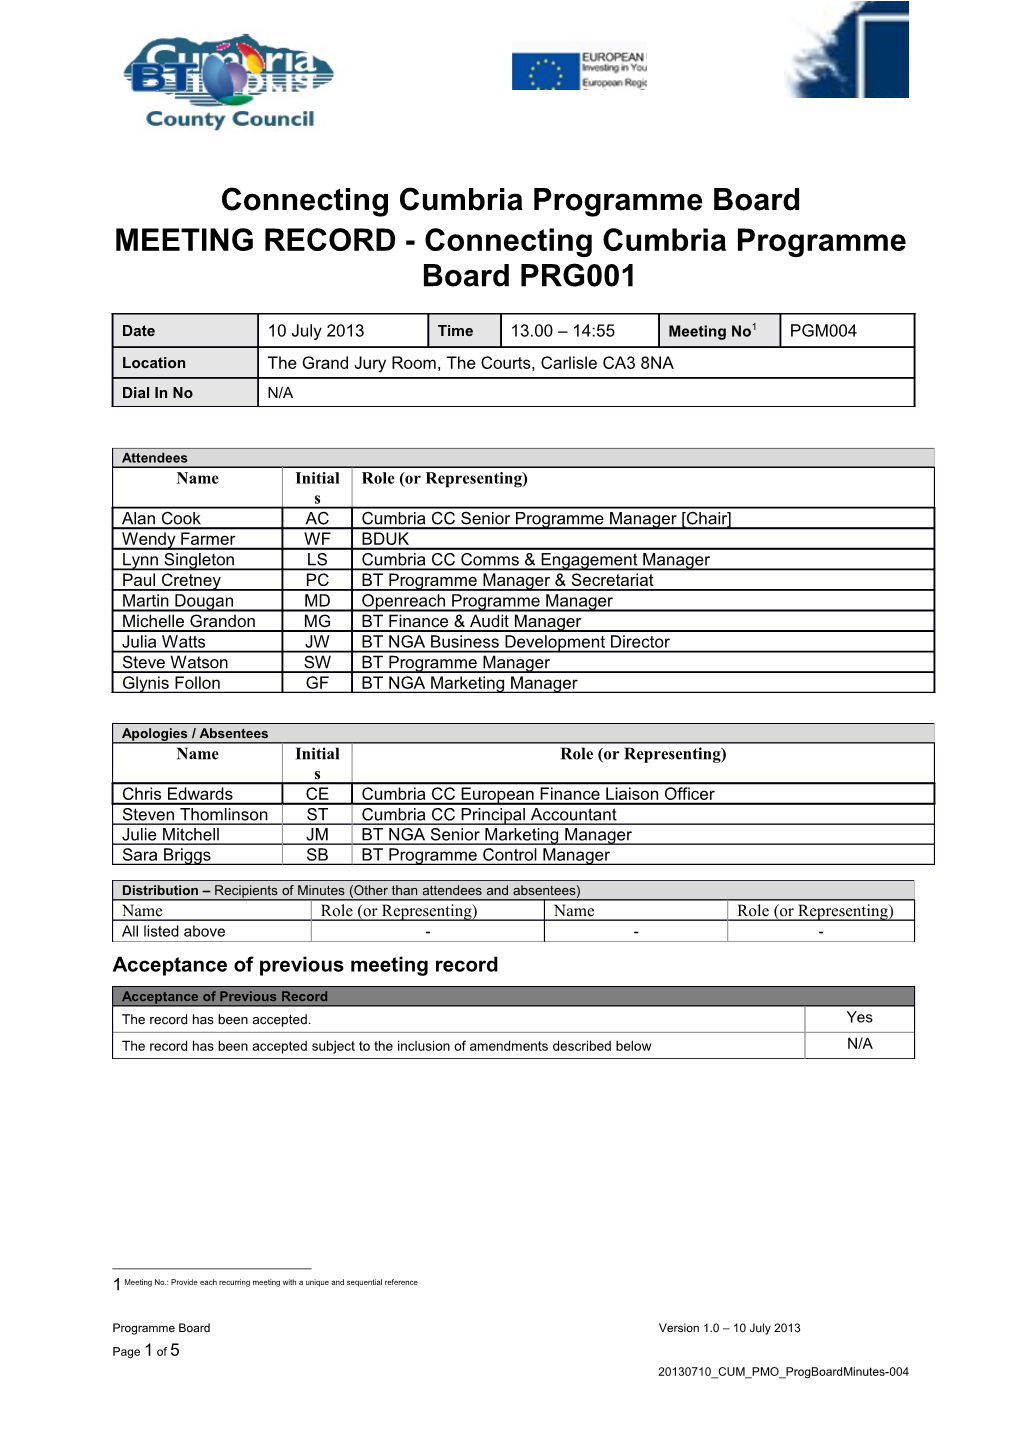 MEETING RECORD - Connecting Cumbria Programme Board PRG001